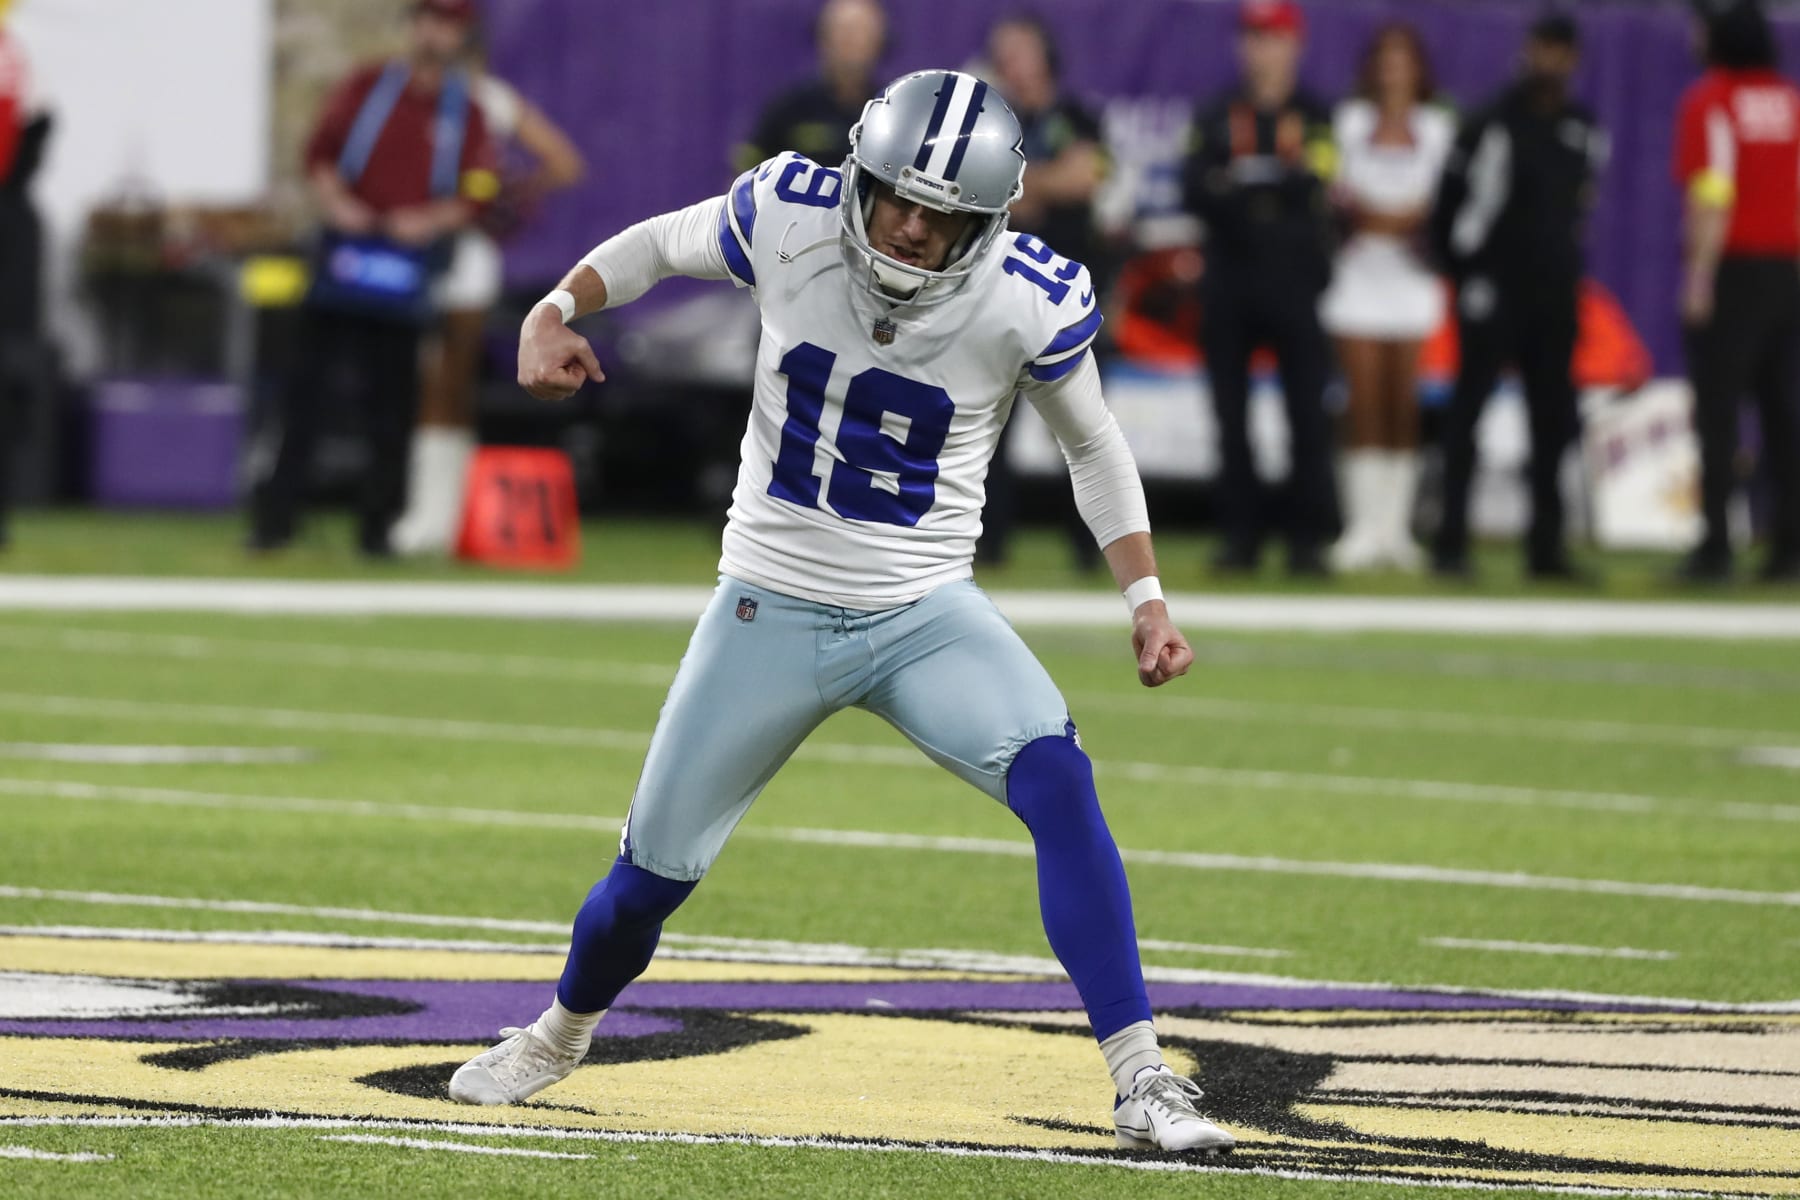 6 major takeaways from the Cowboys' statement win over the Vikings